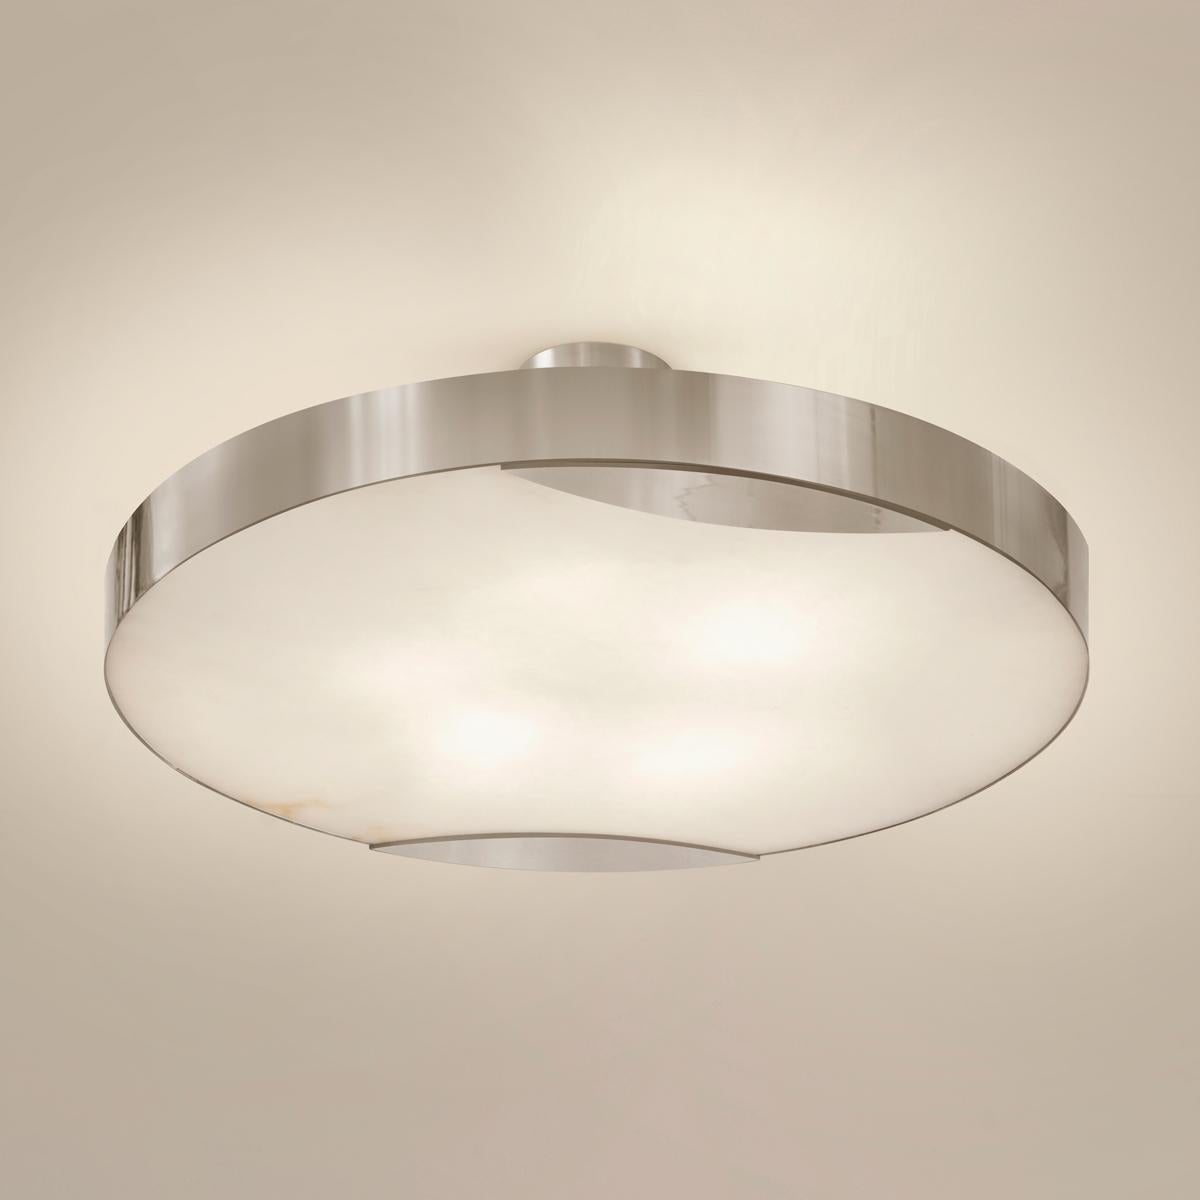 Cloud N.1 Ceiling Light by Gaspare Asaro-Peltro Finish For Sale 2